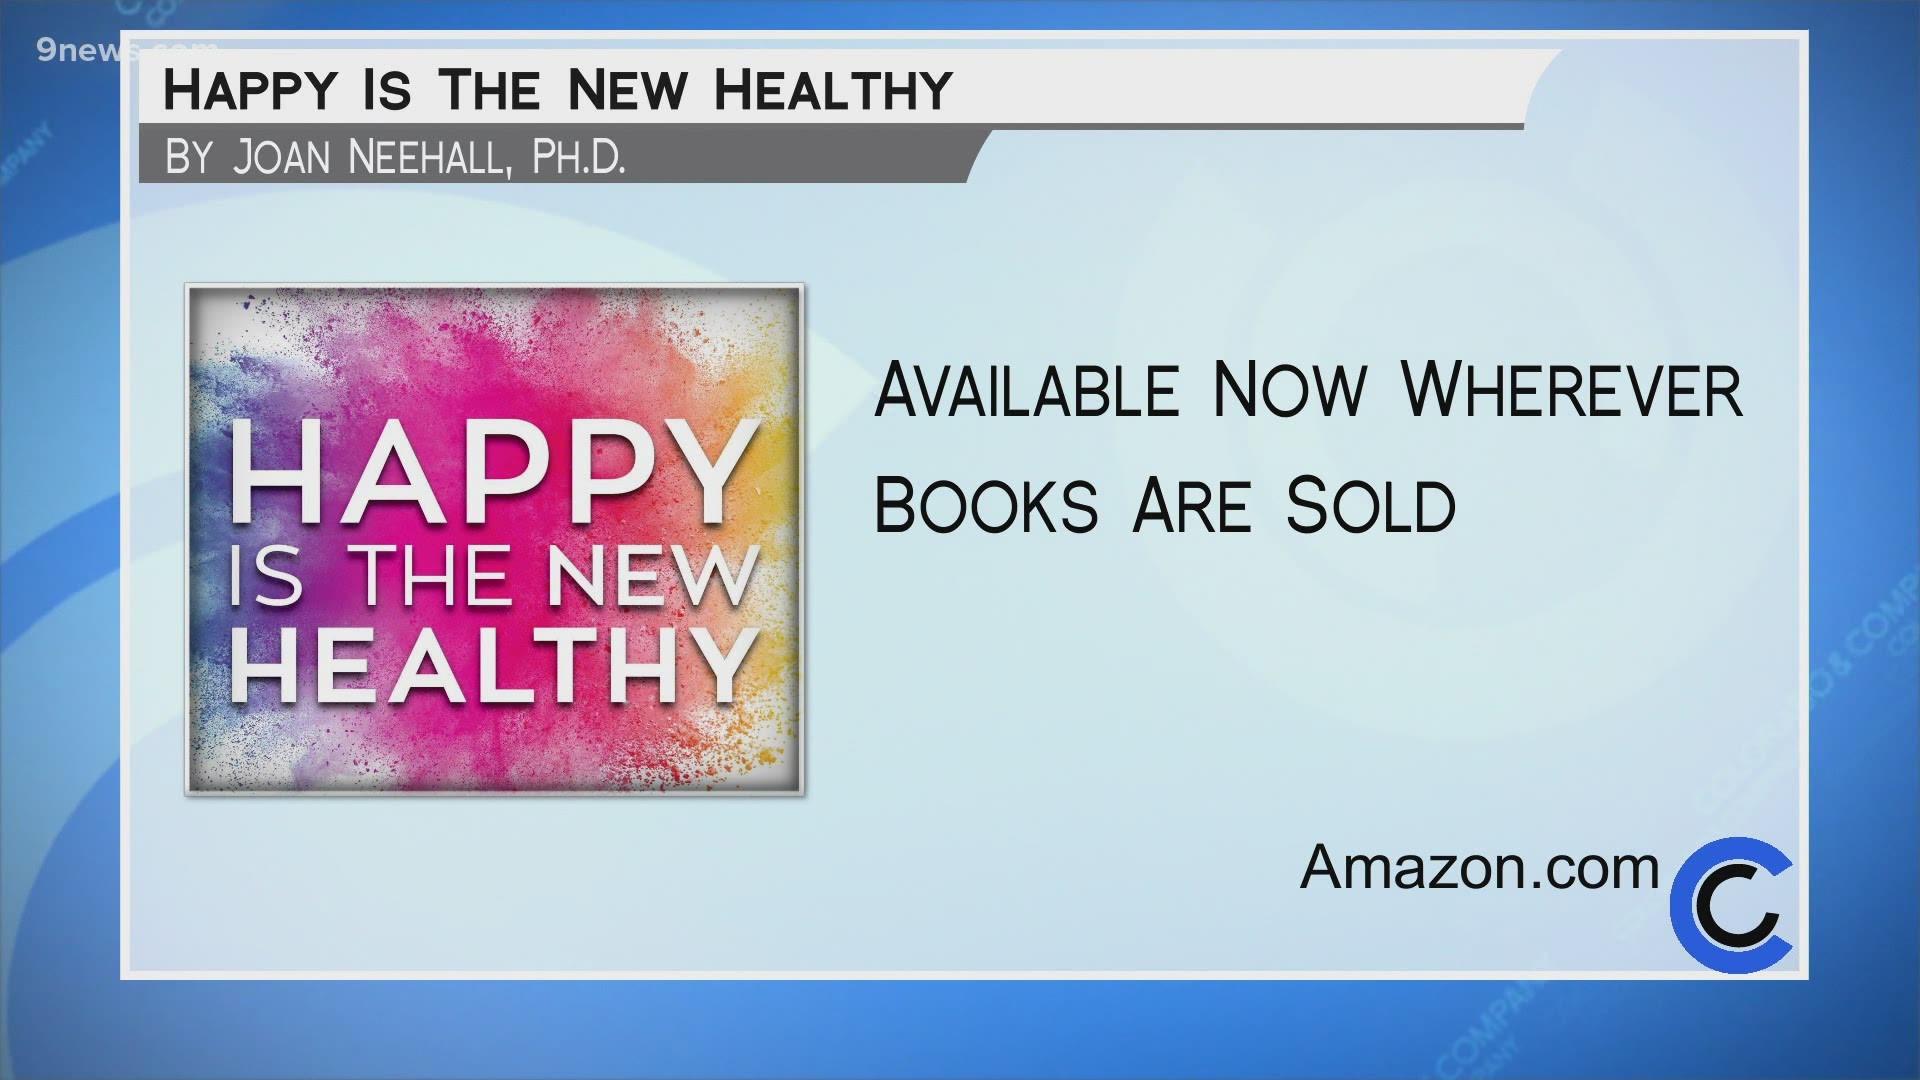 Find Dr. Neehall's book wherever books are sold.